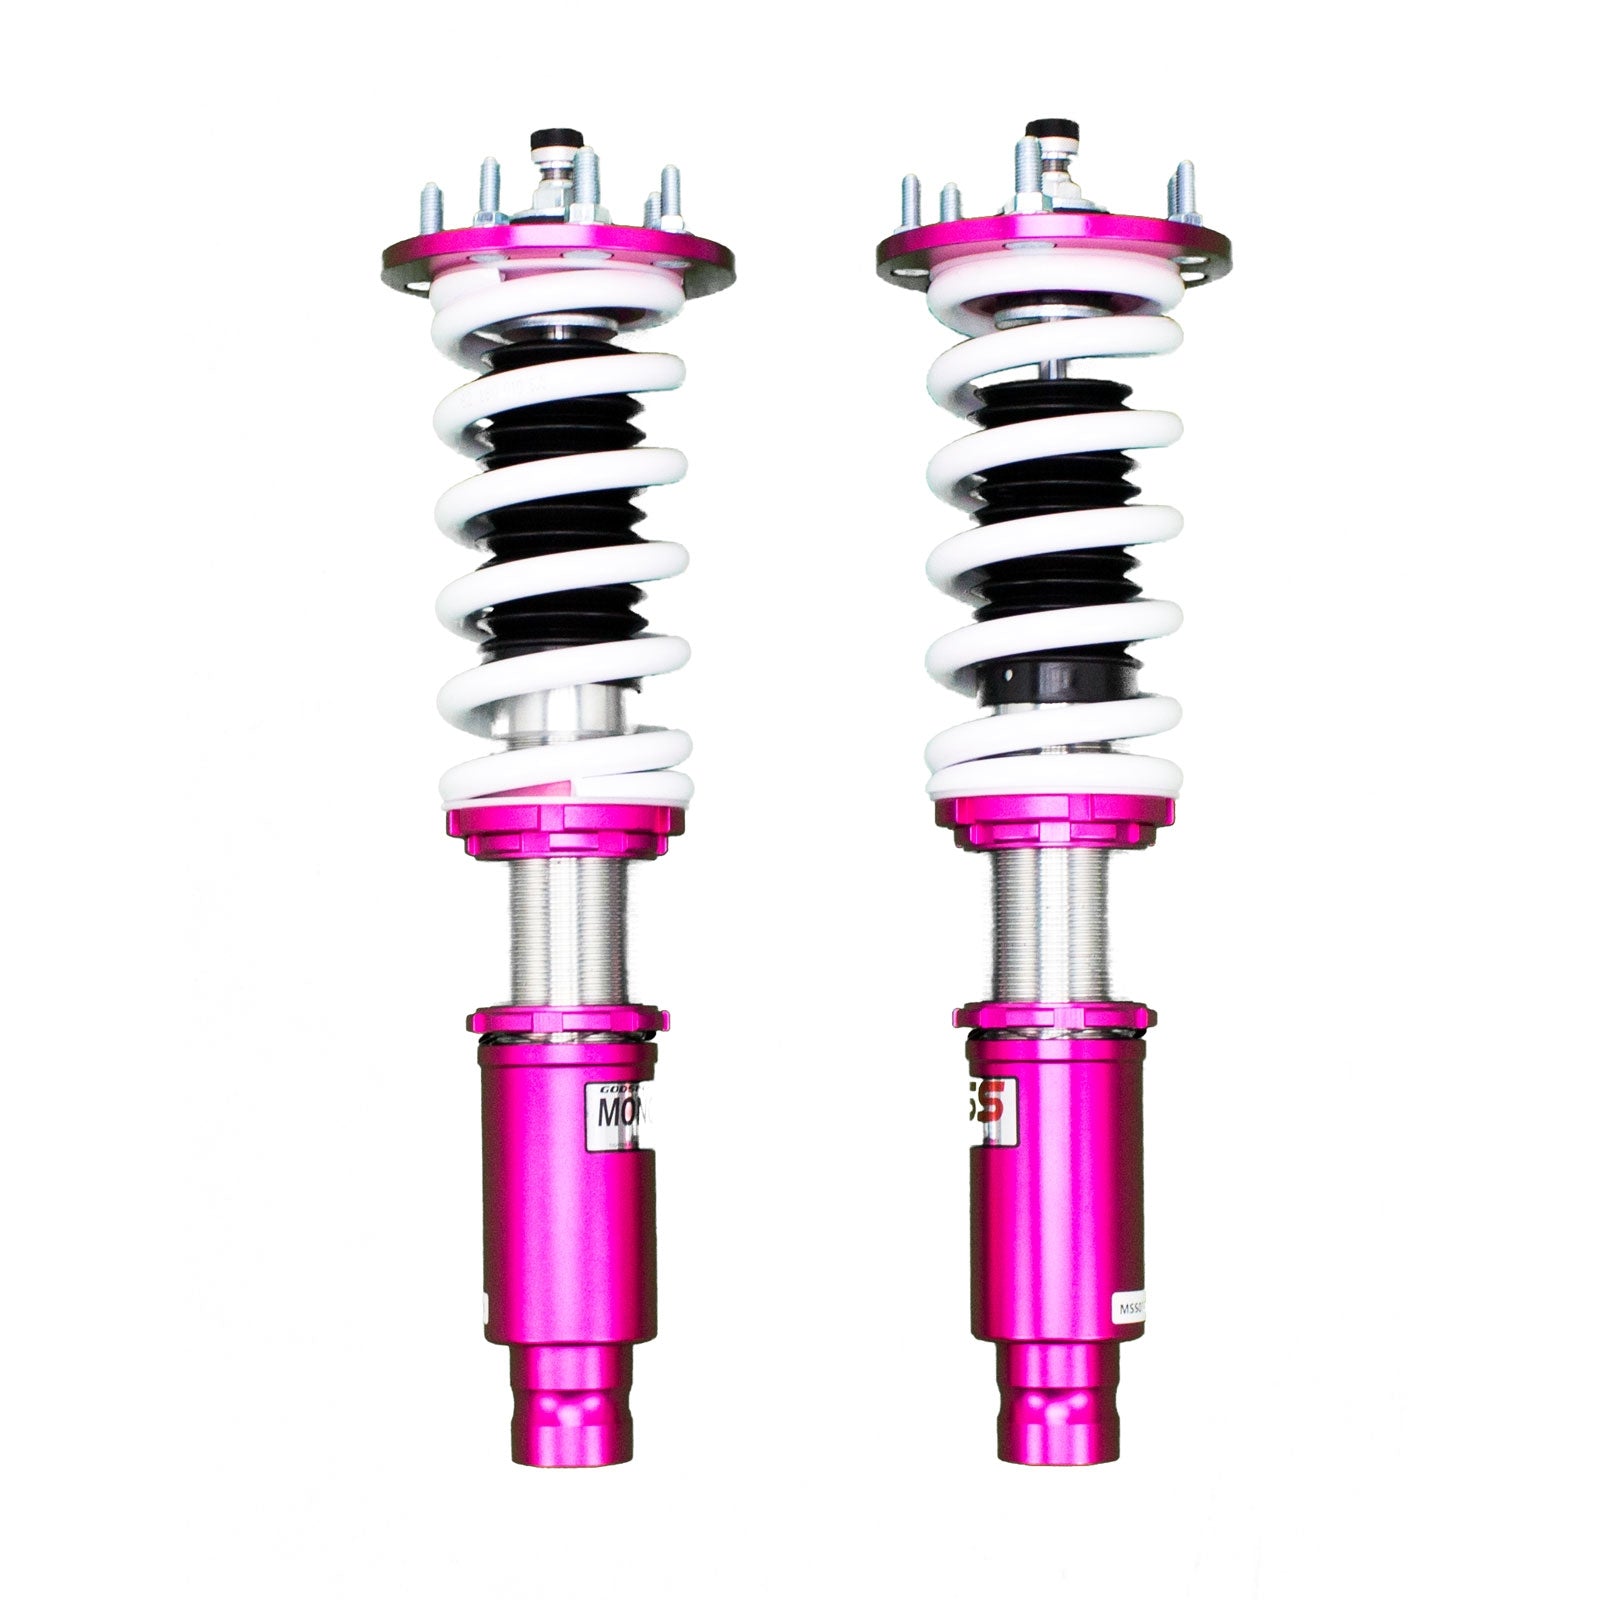 Godspeed MSS0186 MonoSS Coilover Lowering Kit, Fully Adjustable, Ride Height, Spring Tension And 16 Click Damping, Acura TL 2004-08 All Modesl